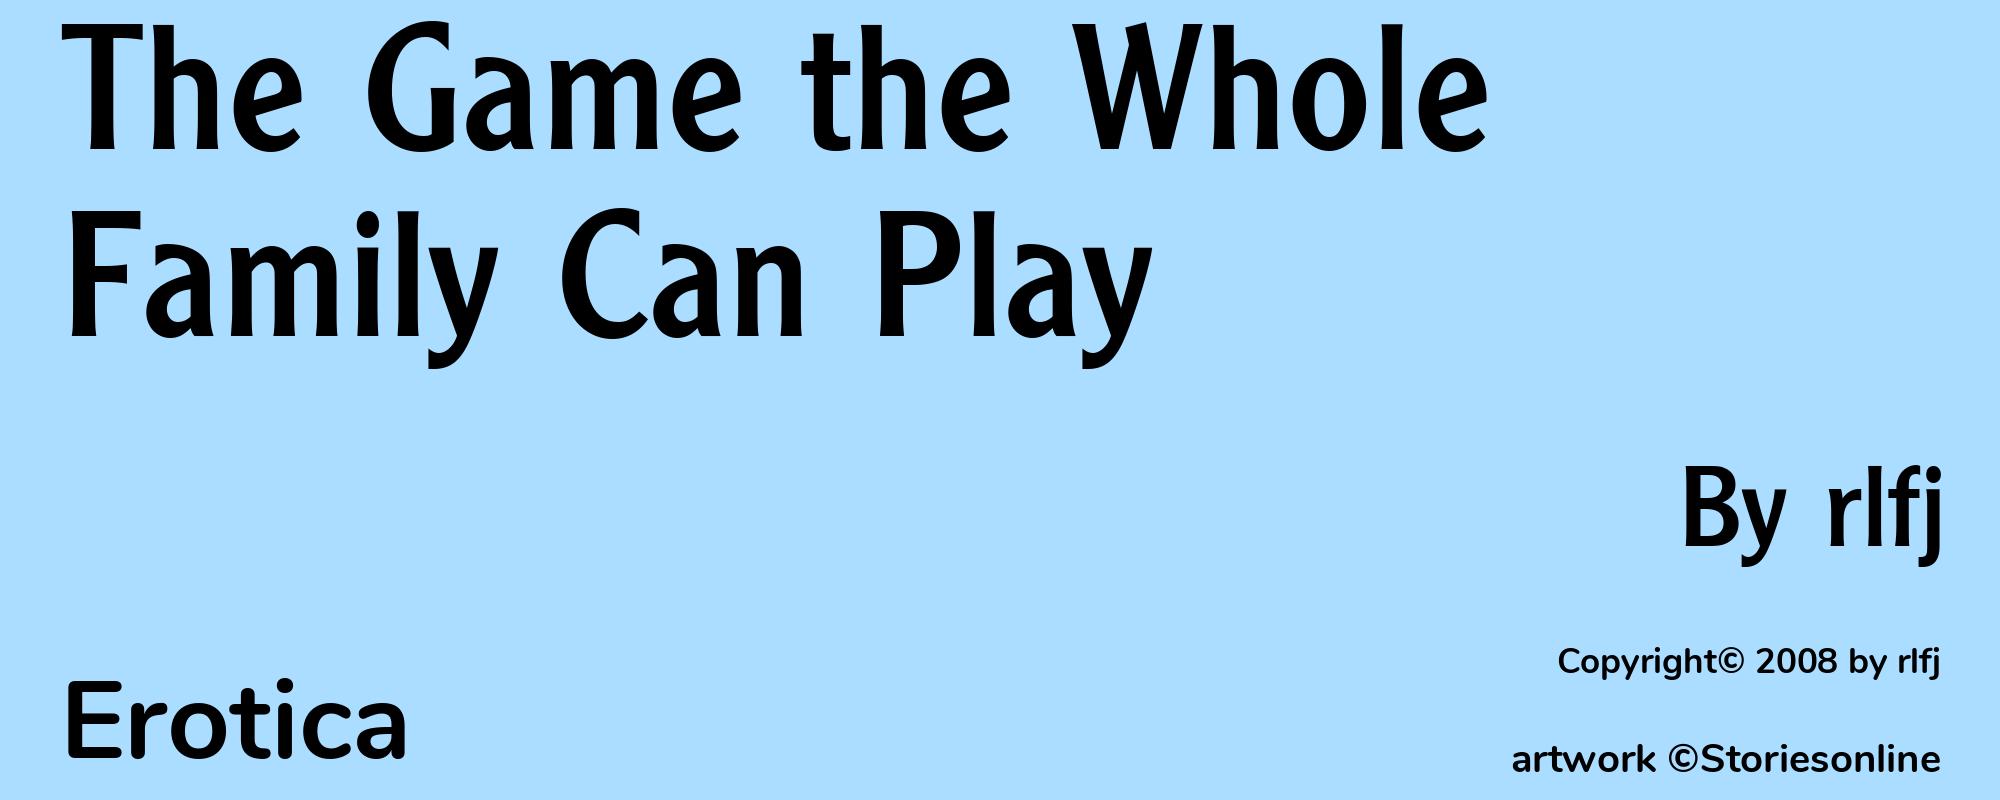 The Game the Whole Family Can Play - Cover